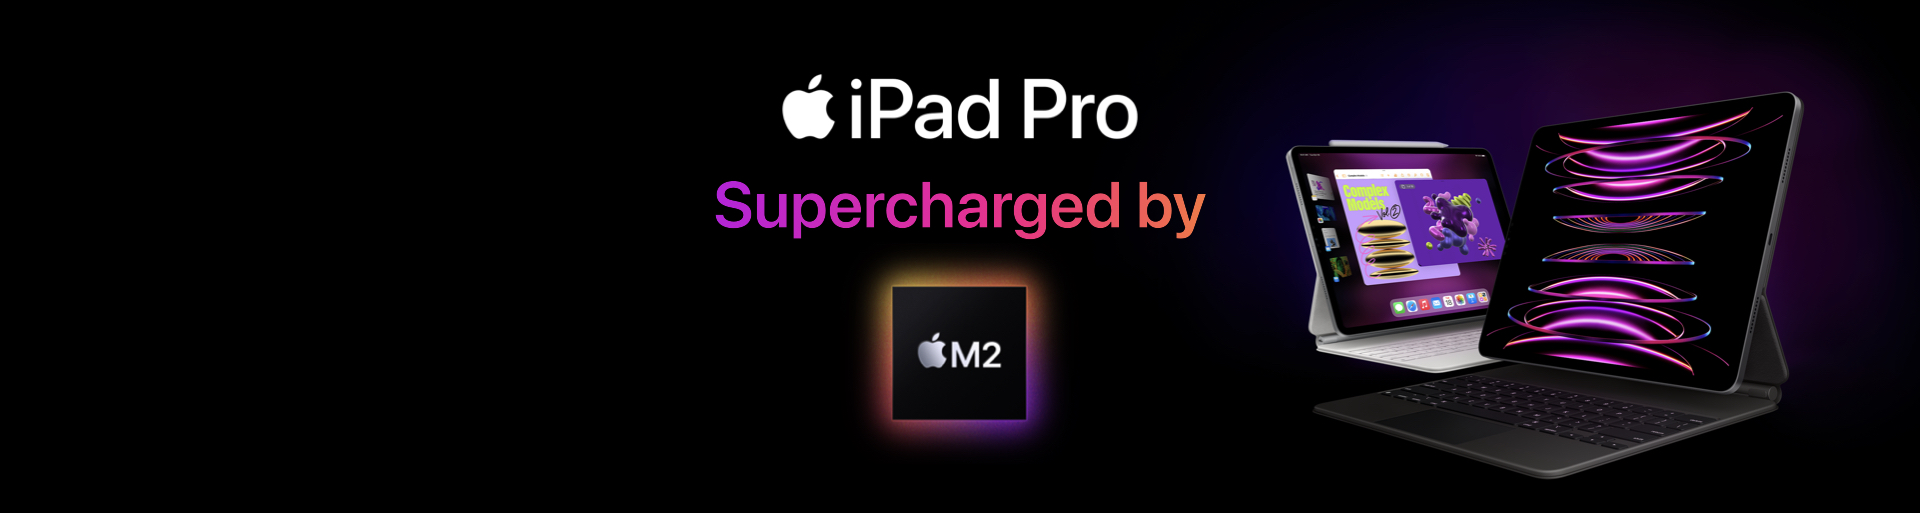 iPad Pro. Supercharged by M2